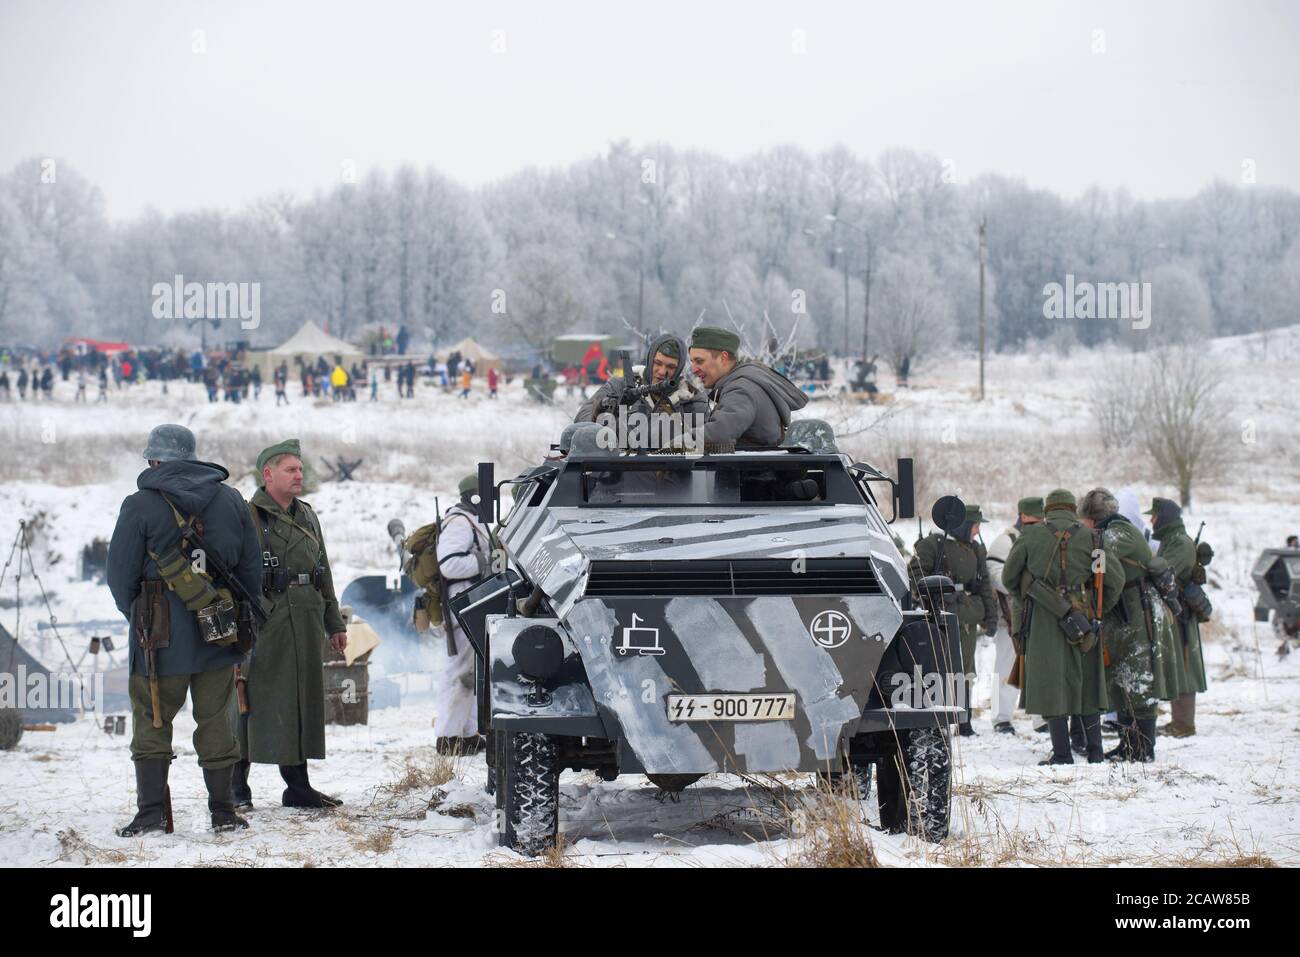 LENINGRAD REGION, RUSSIA - JANUARY 14, 2018: Participants in the military historical festival 'January Thunder' in the form of Wehrmacht soldiers befo Stock Photo